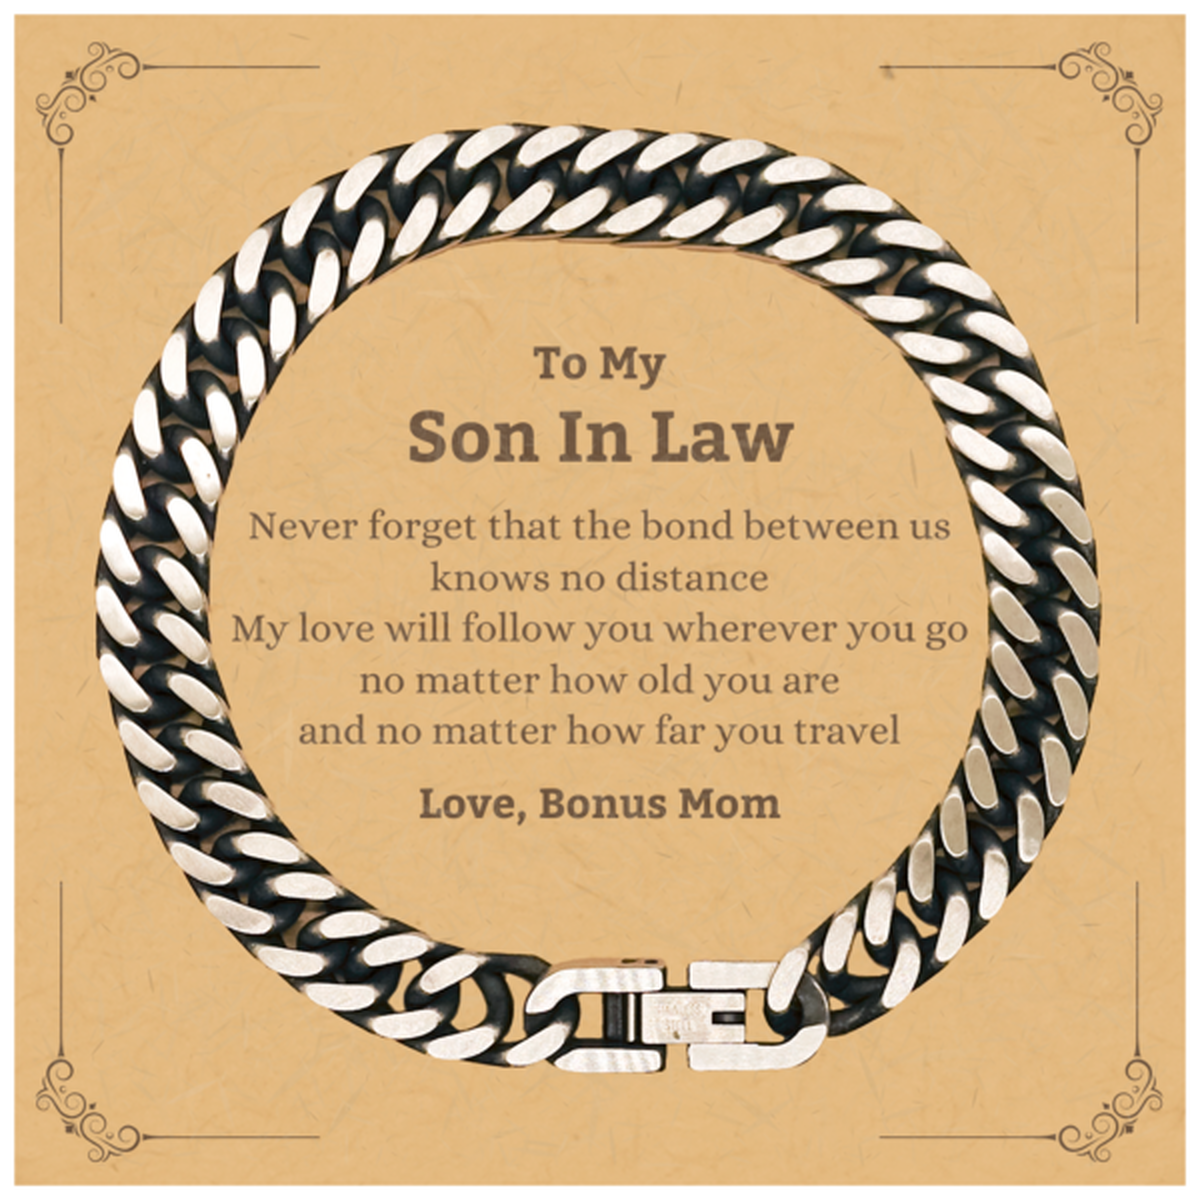 Son In Law Birthday Gifts from Bonus Mom, Adjustable Cuban Link Chain Bracelet for Son In Law Christmas Graduation Unique Gifts Son In Law Never forget that the bond between us knows no distance. Love, Bonus Mom